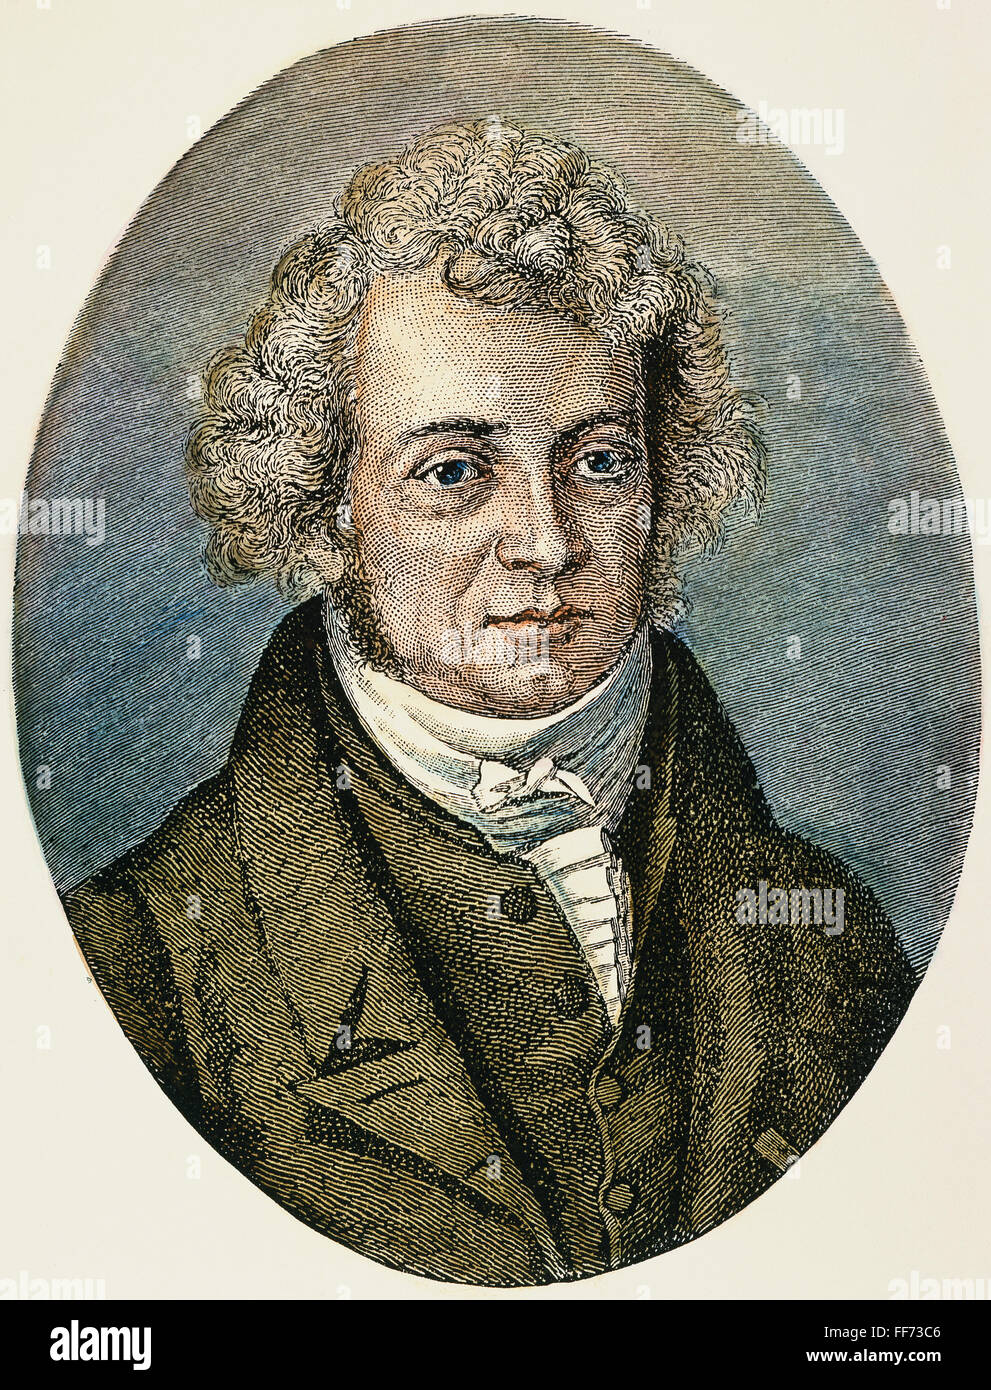 ANDRE-MARIE AMPERE /n(1775-1836). French physicist. 19th century engraving. Stock Photo